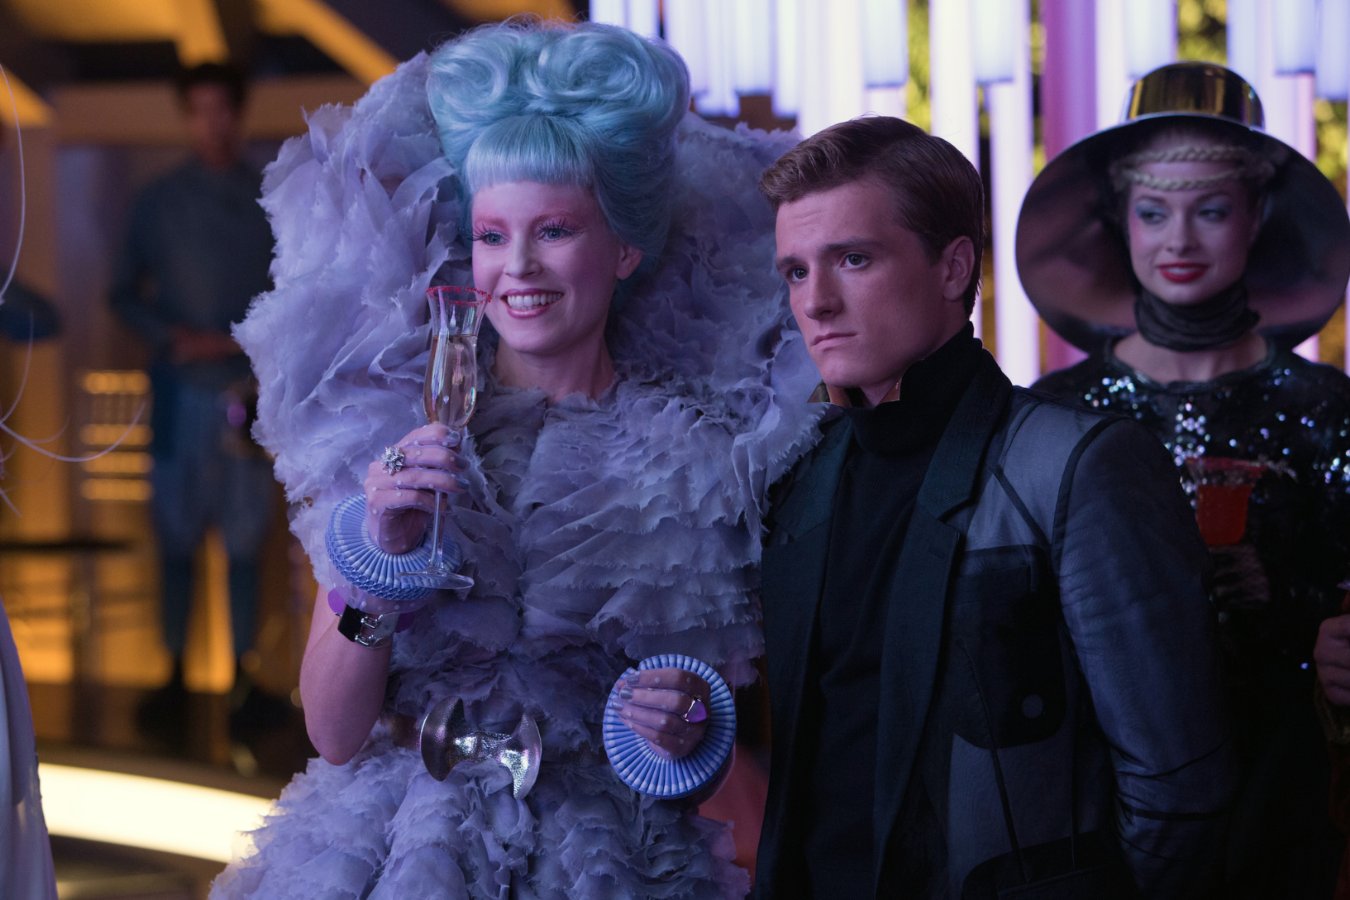 4. "The Hunger Games" - wide 7